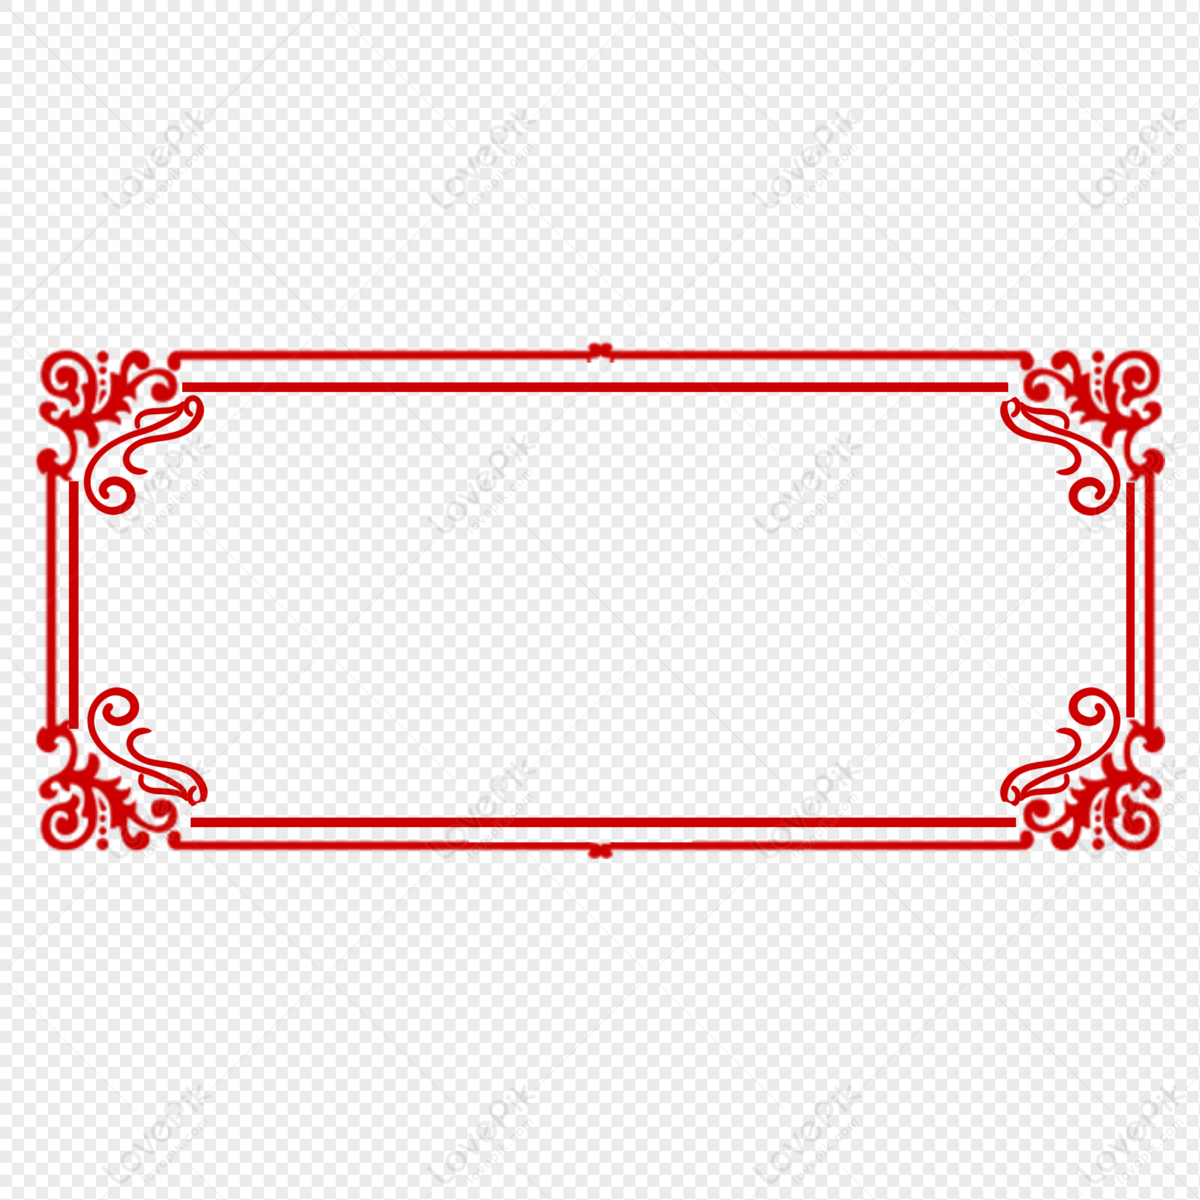 Traditional Chinese Border PNG Transparent Background And Clipart Image